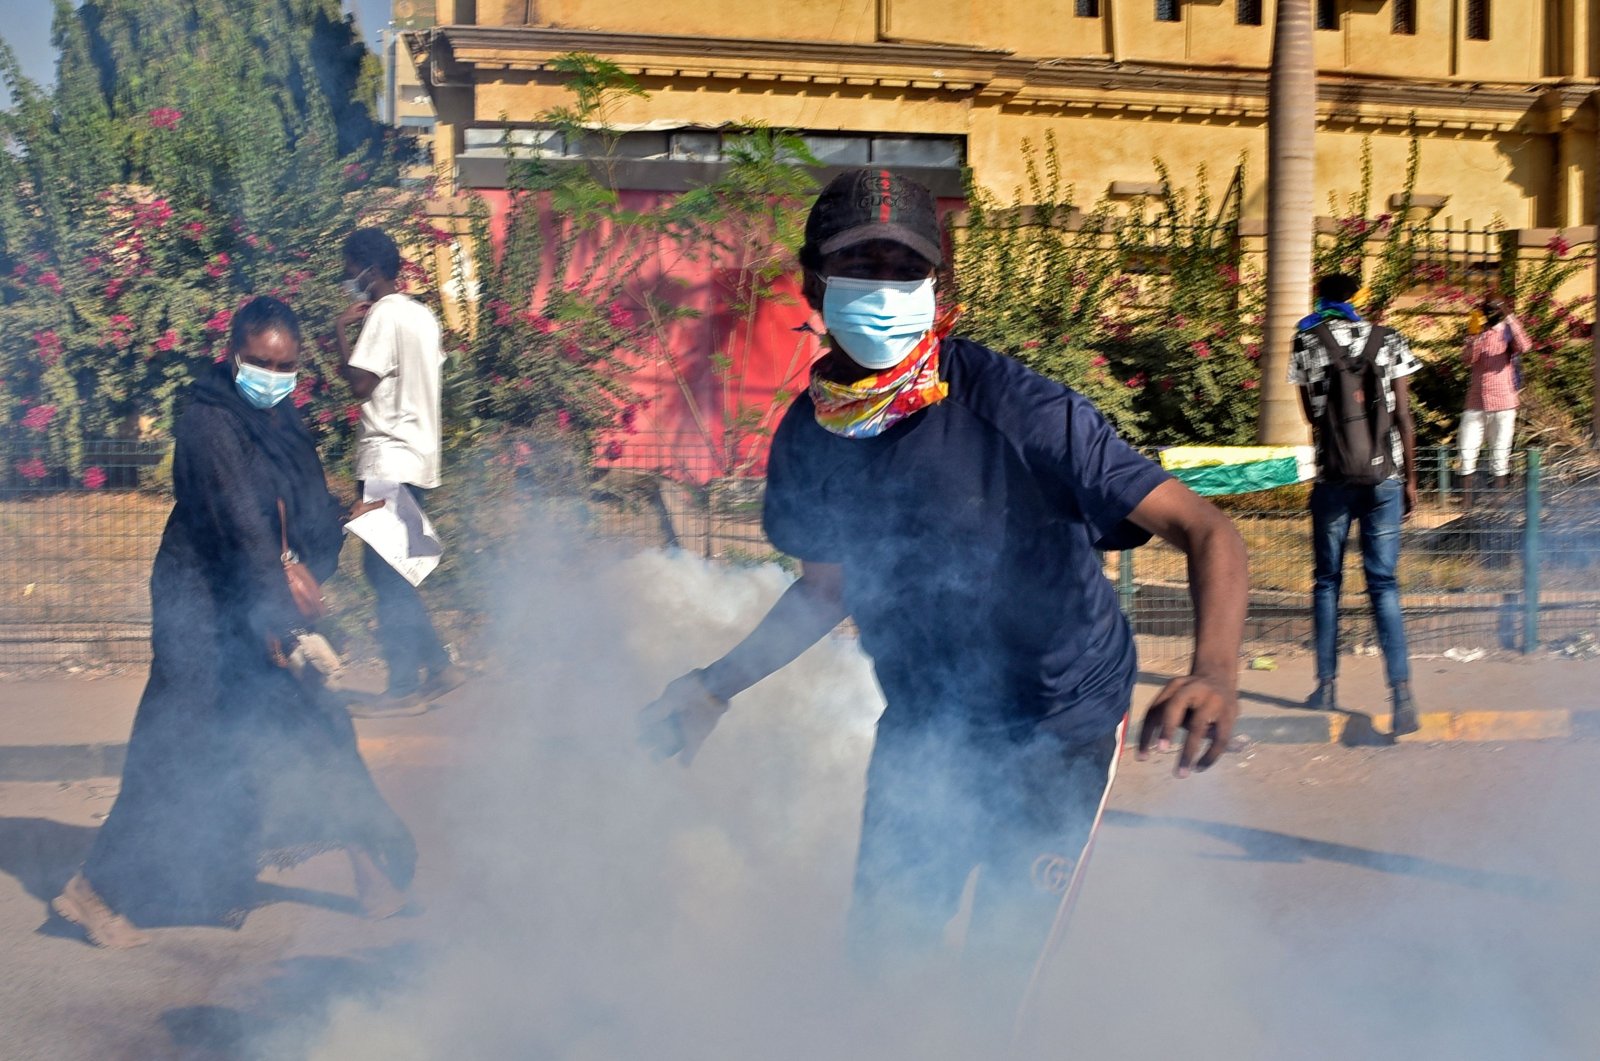 Demonstrators hurl tear gas canisters back at security forces amidst clashes in the center of Sudan&#039;s capital Khartoum, Nov. 30, 2021 following protests against a deal that saw the civilian prime minister reinstated after the military coup in October. (AFP Photo)